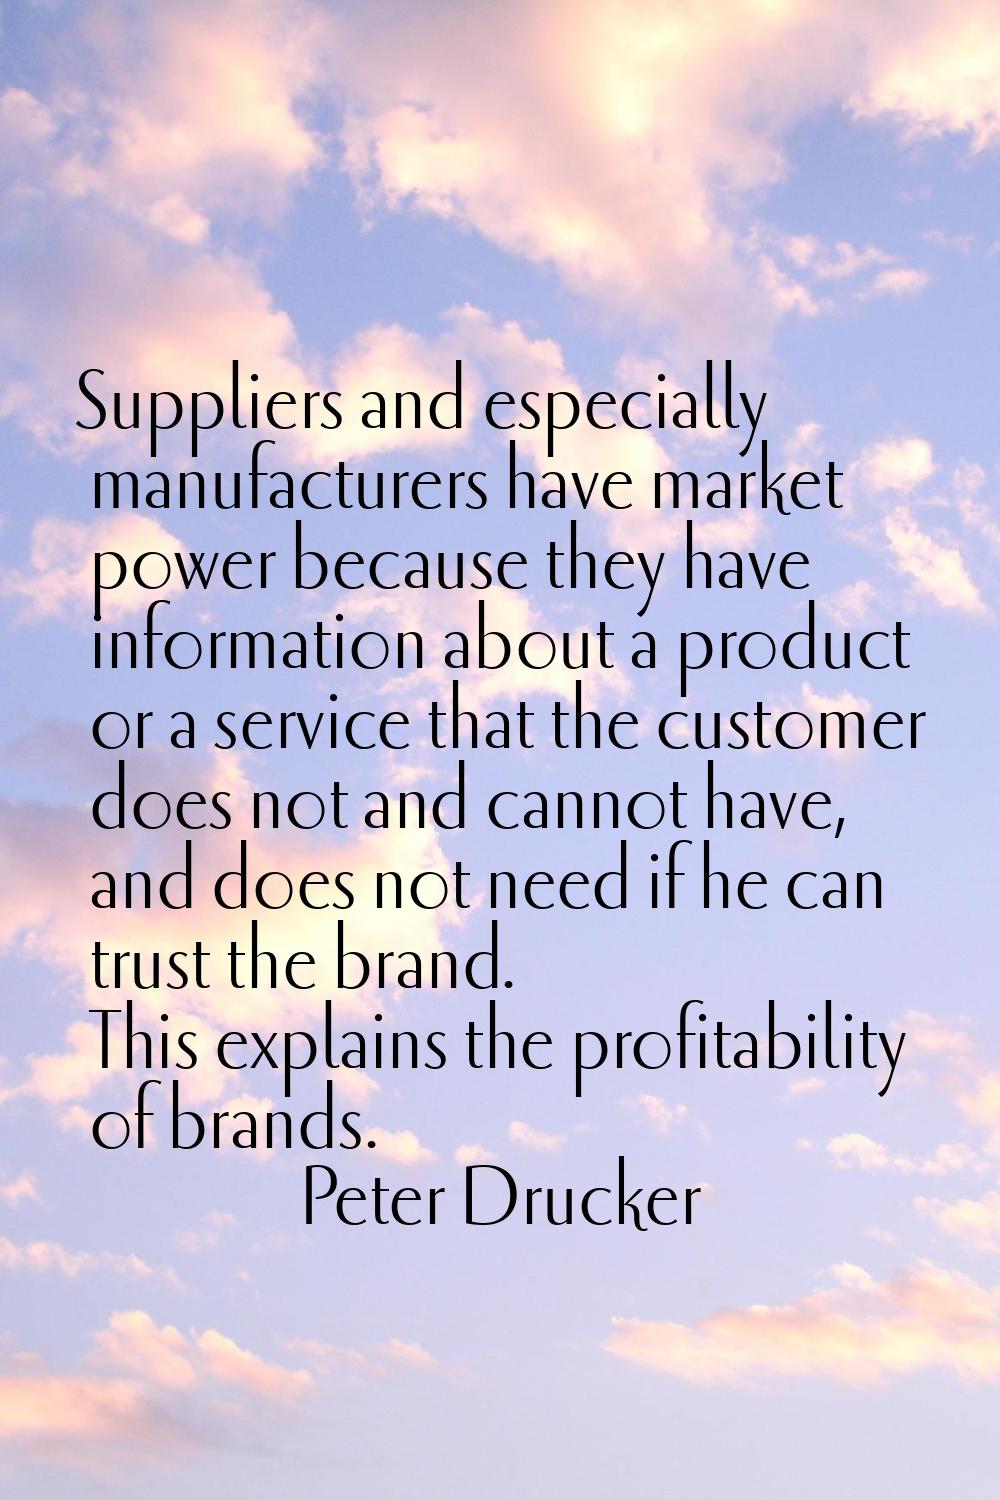 Suppliers and especially manufacturers have market power because they have information about a prod